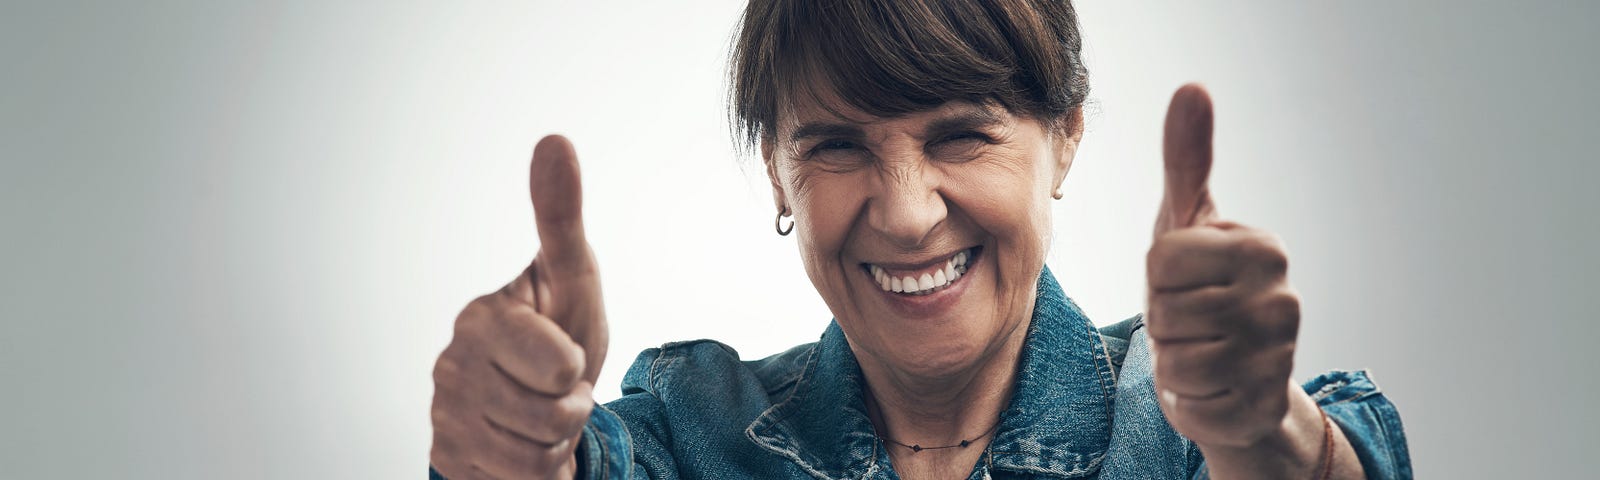 enthusiastic woman in her 50s giving two thumbs up